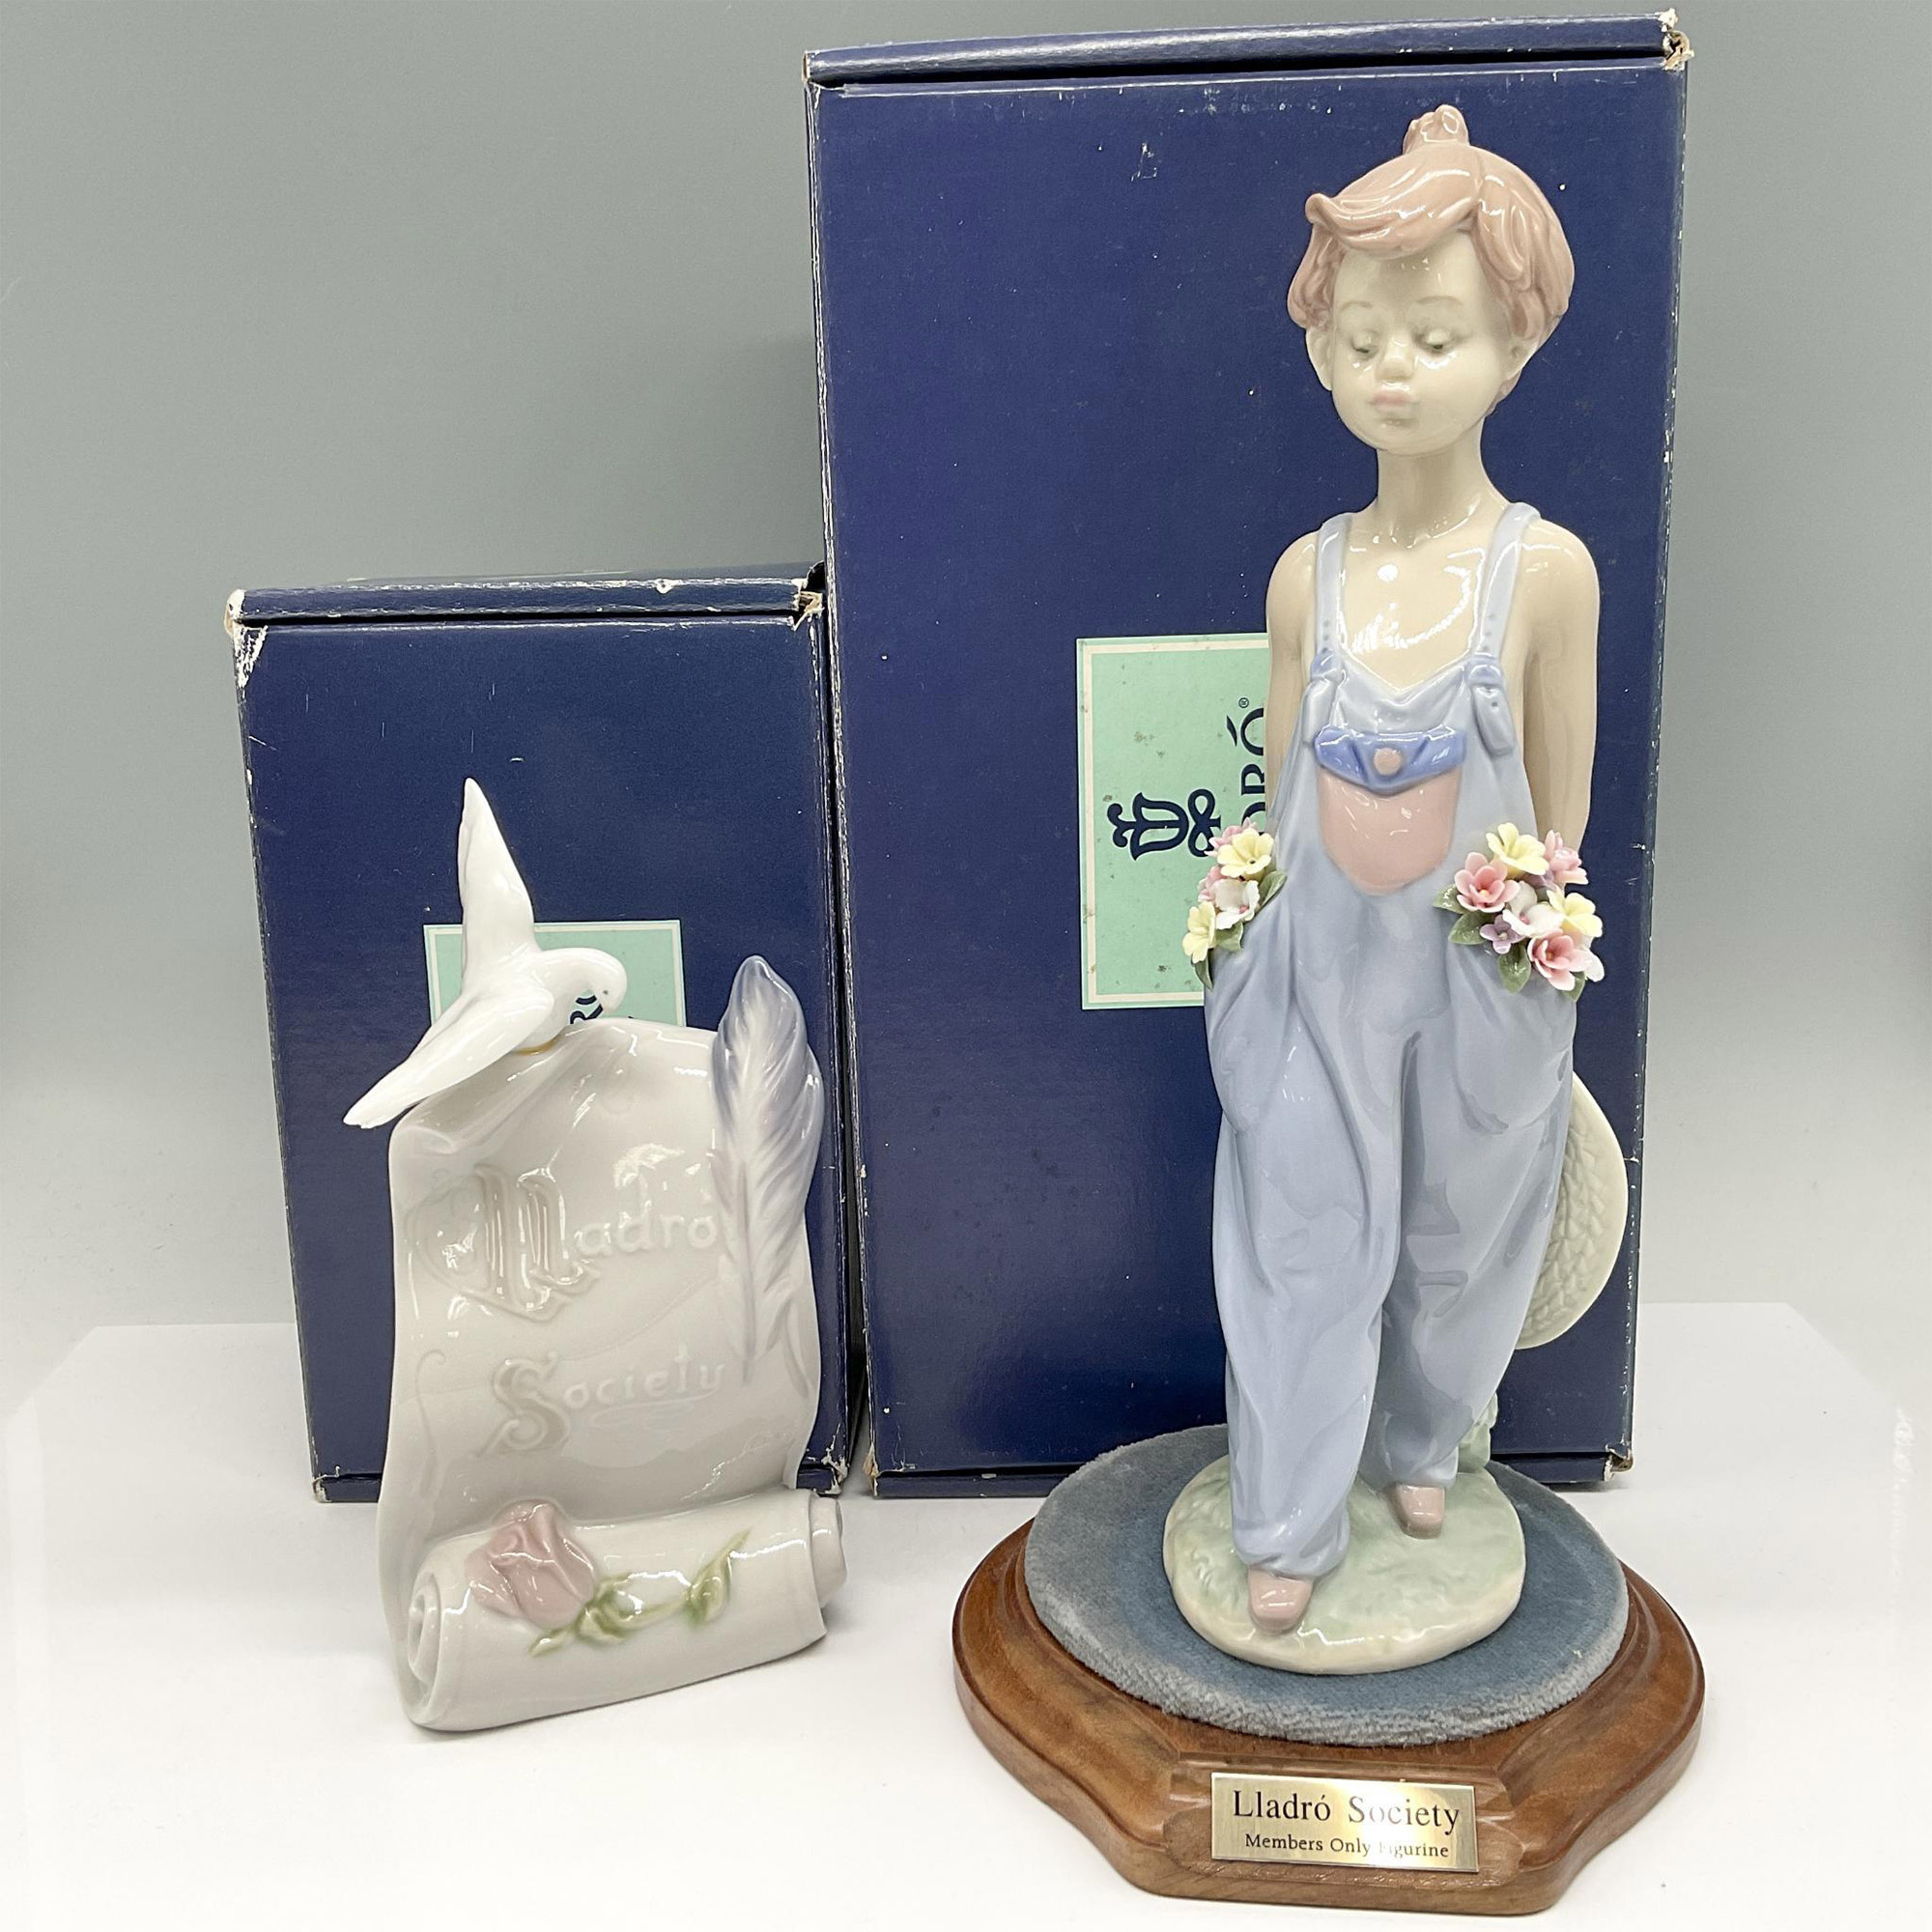 3pc Lladro Figurines Pocket Full of Wishes 100765 - Image 4 of 4